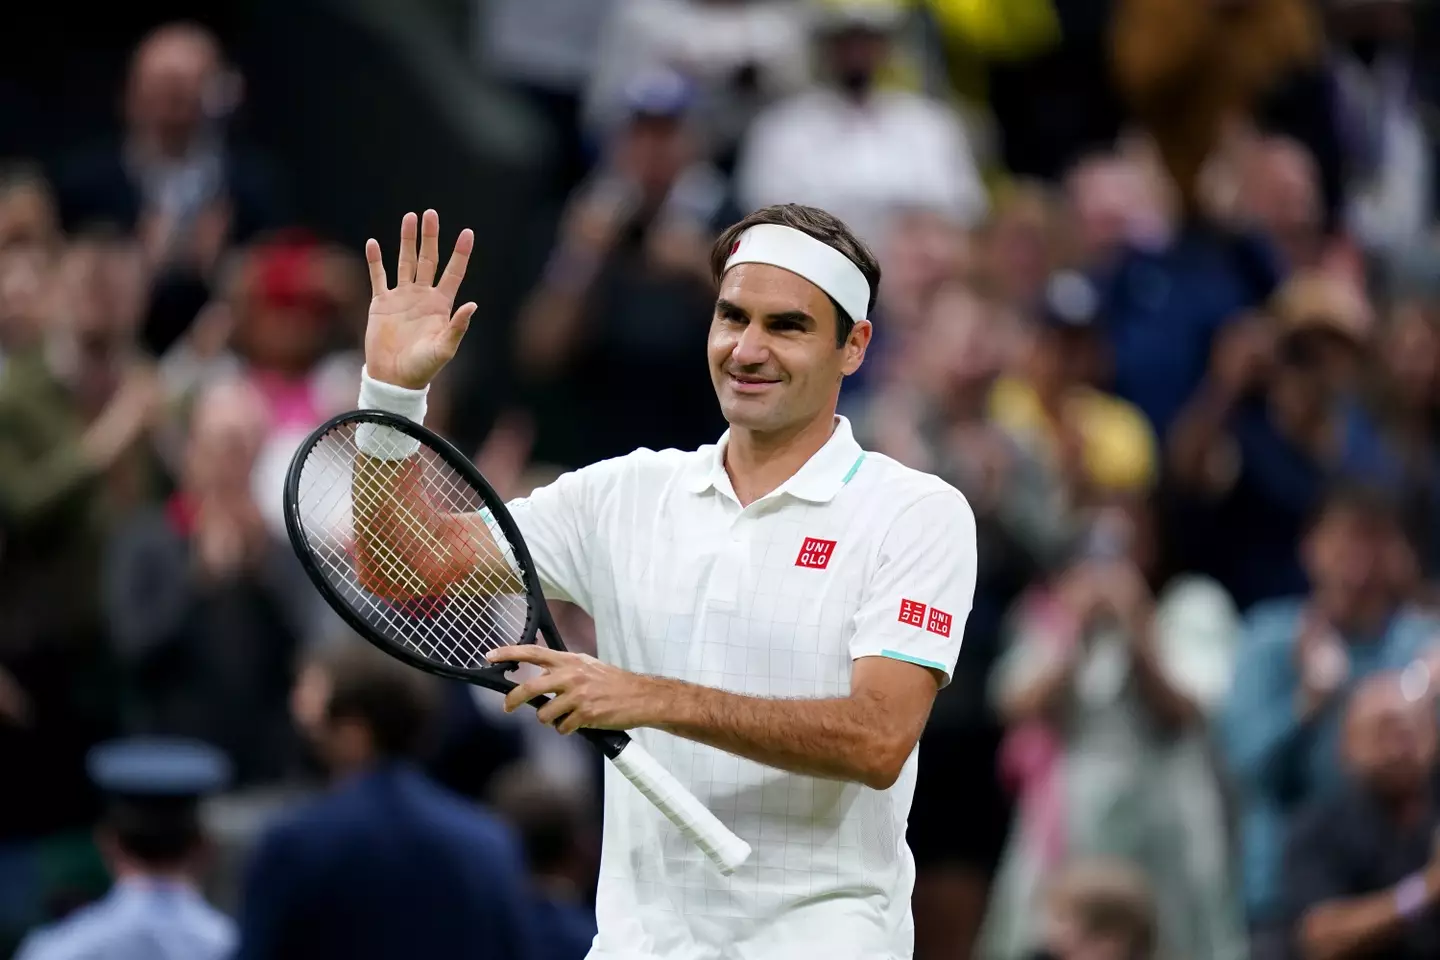 Roger Federer has announced his retirement from professional tennis.